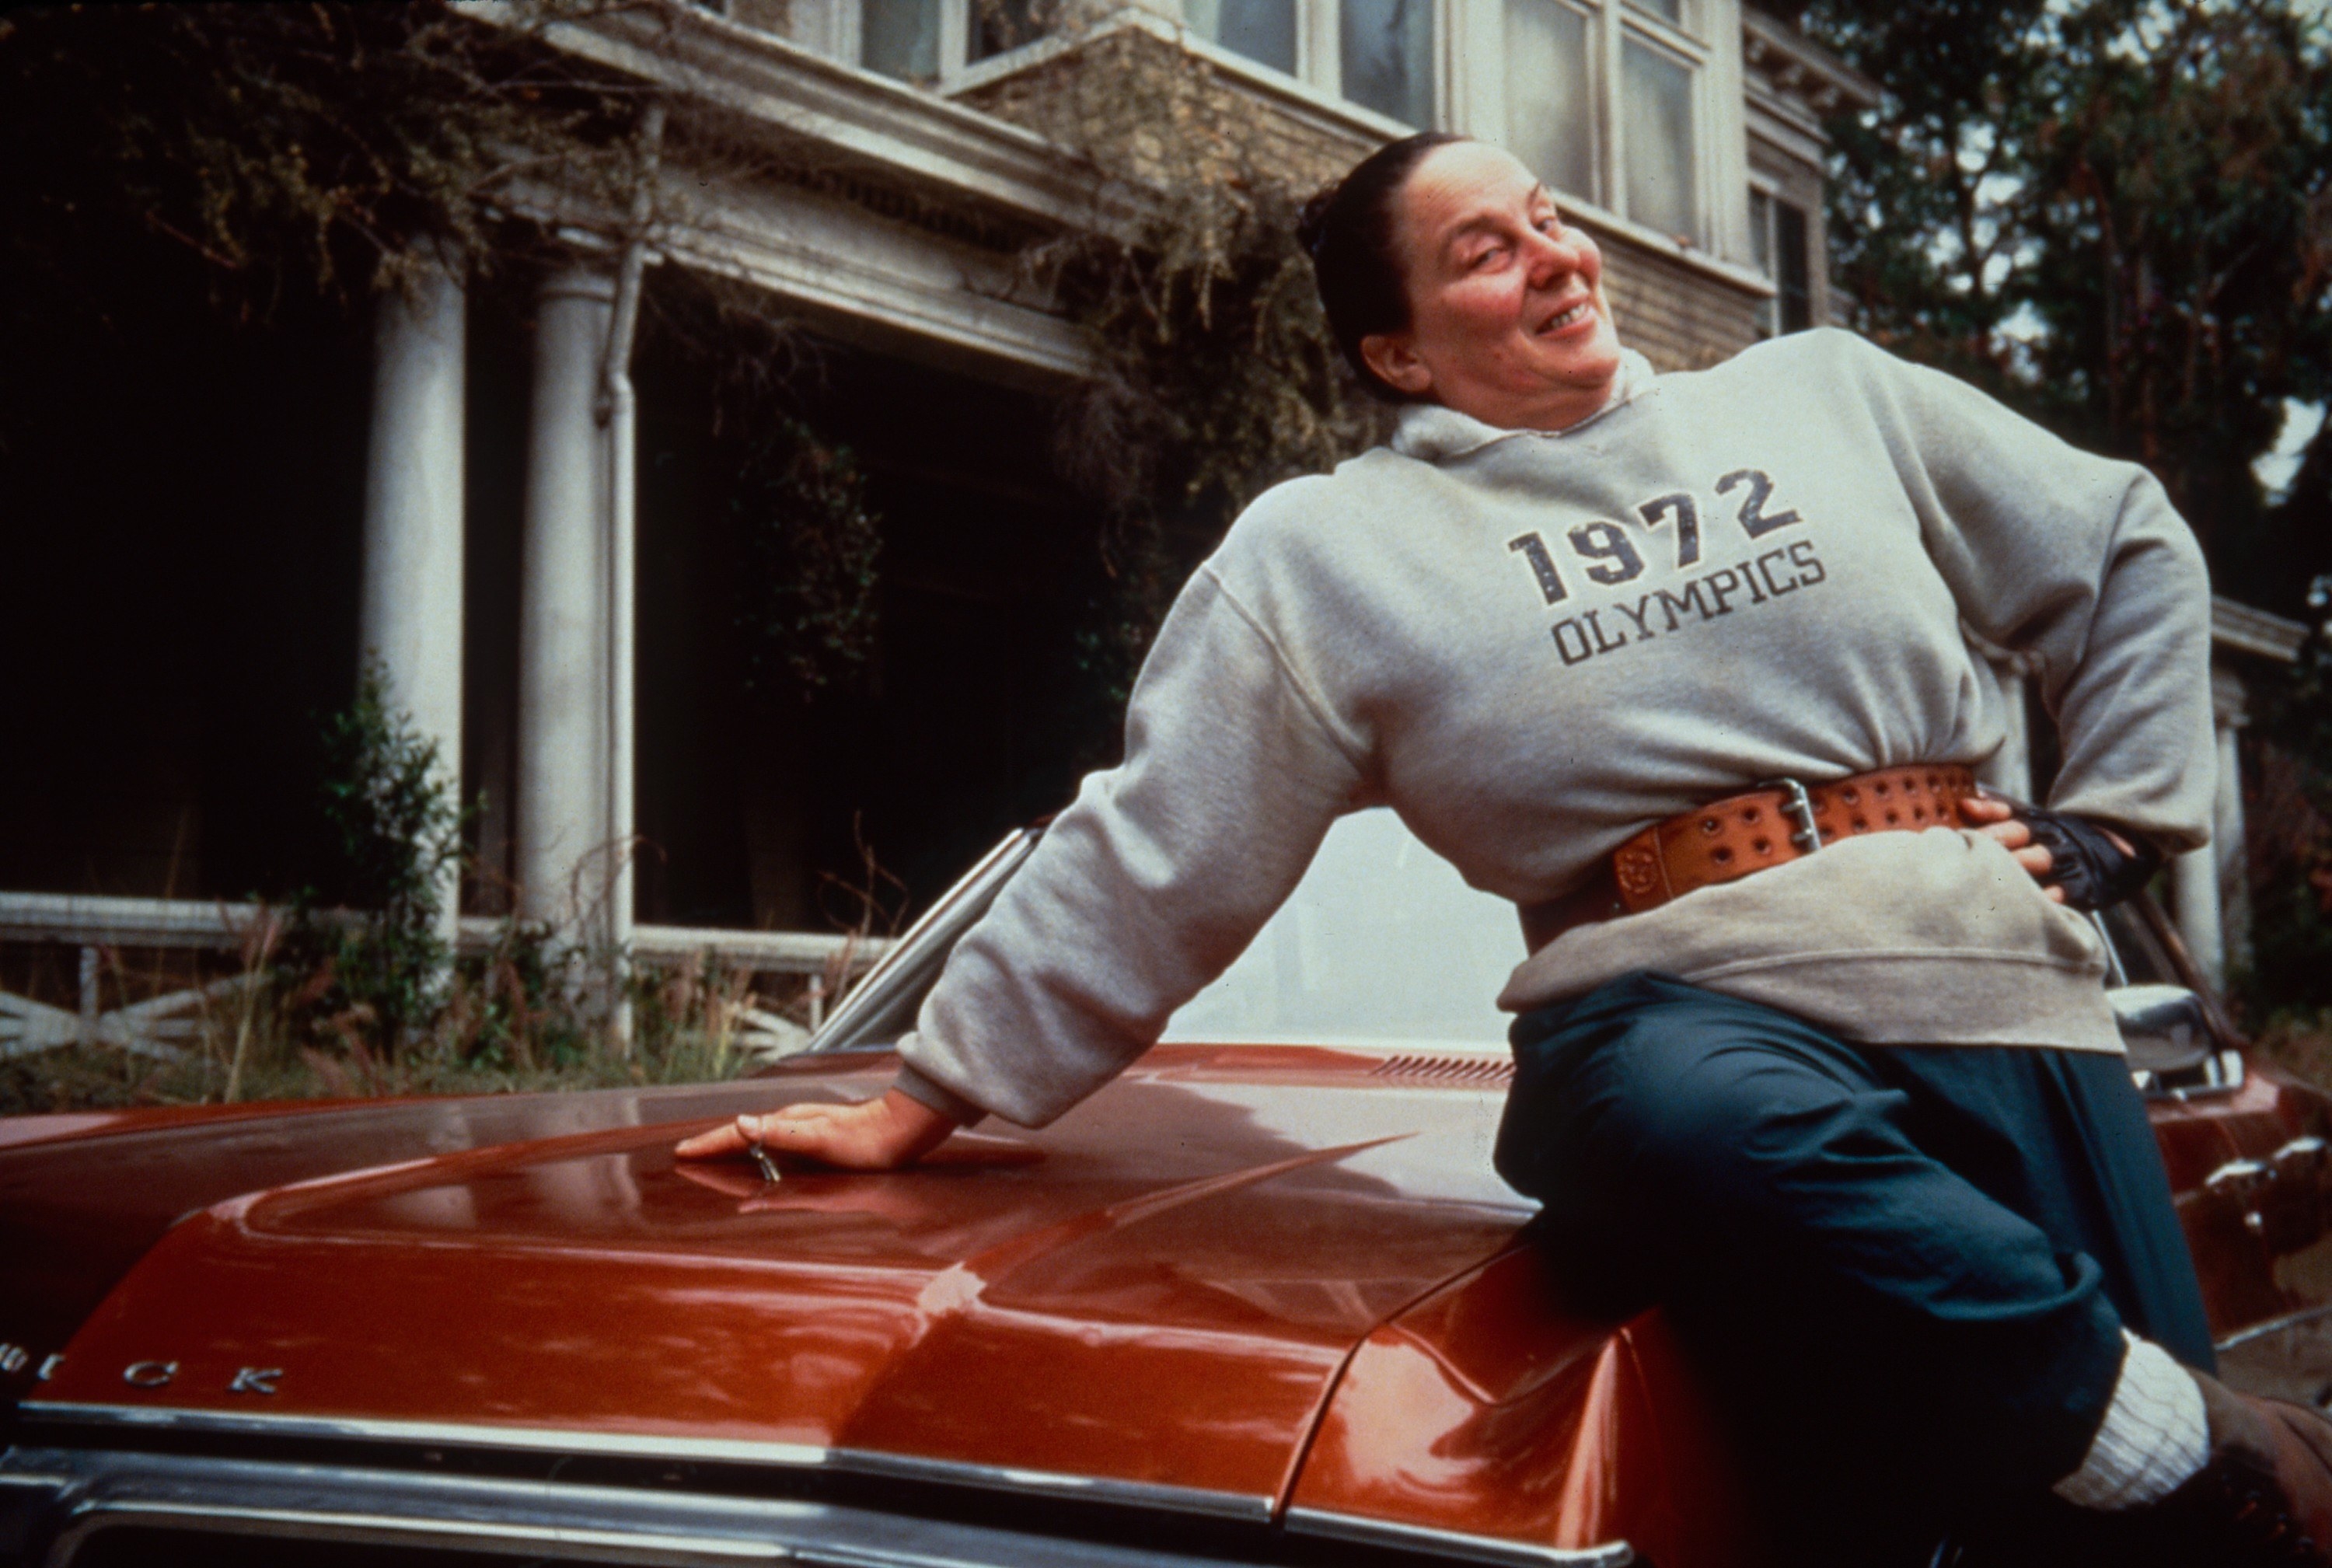 Pam as Trunchbull leaning against a car